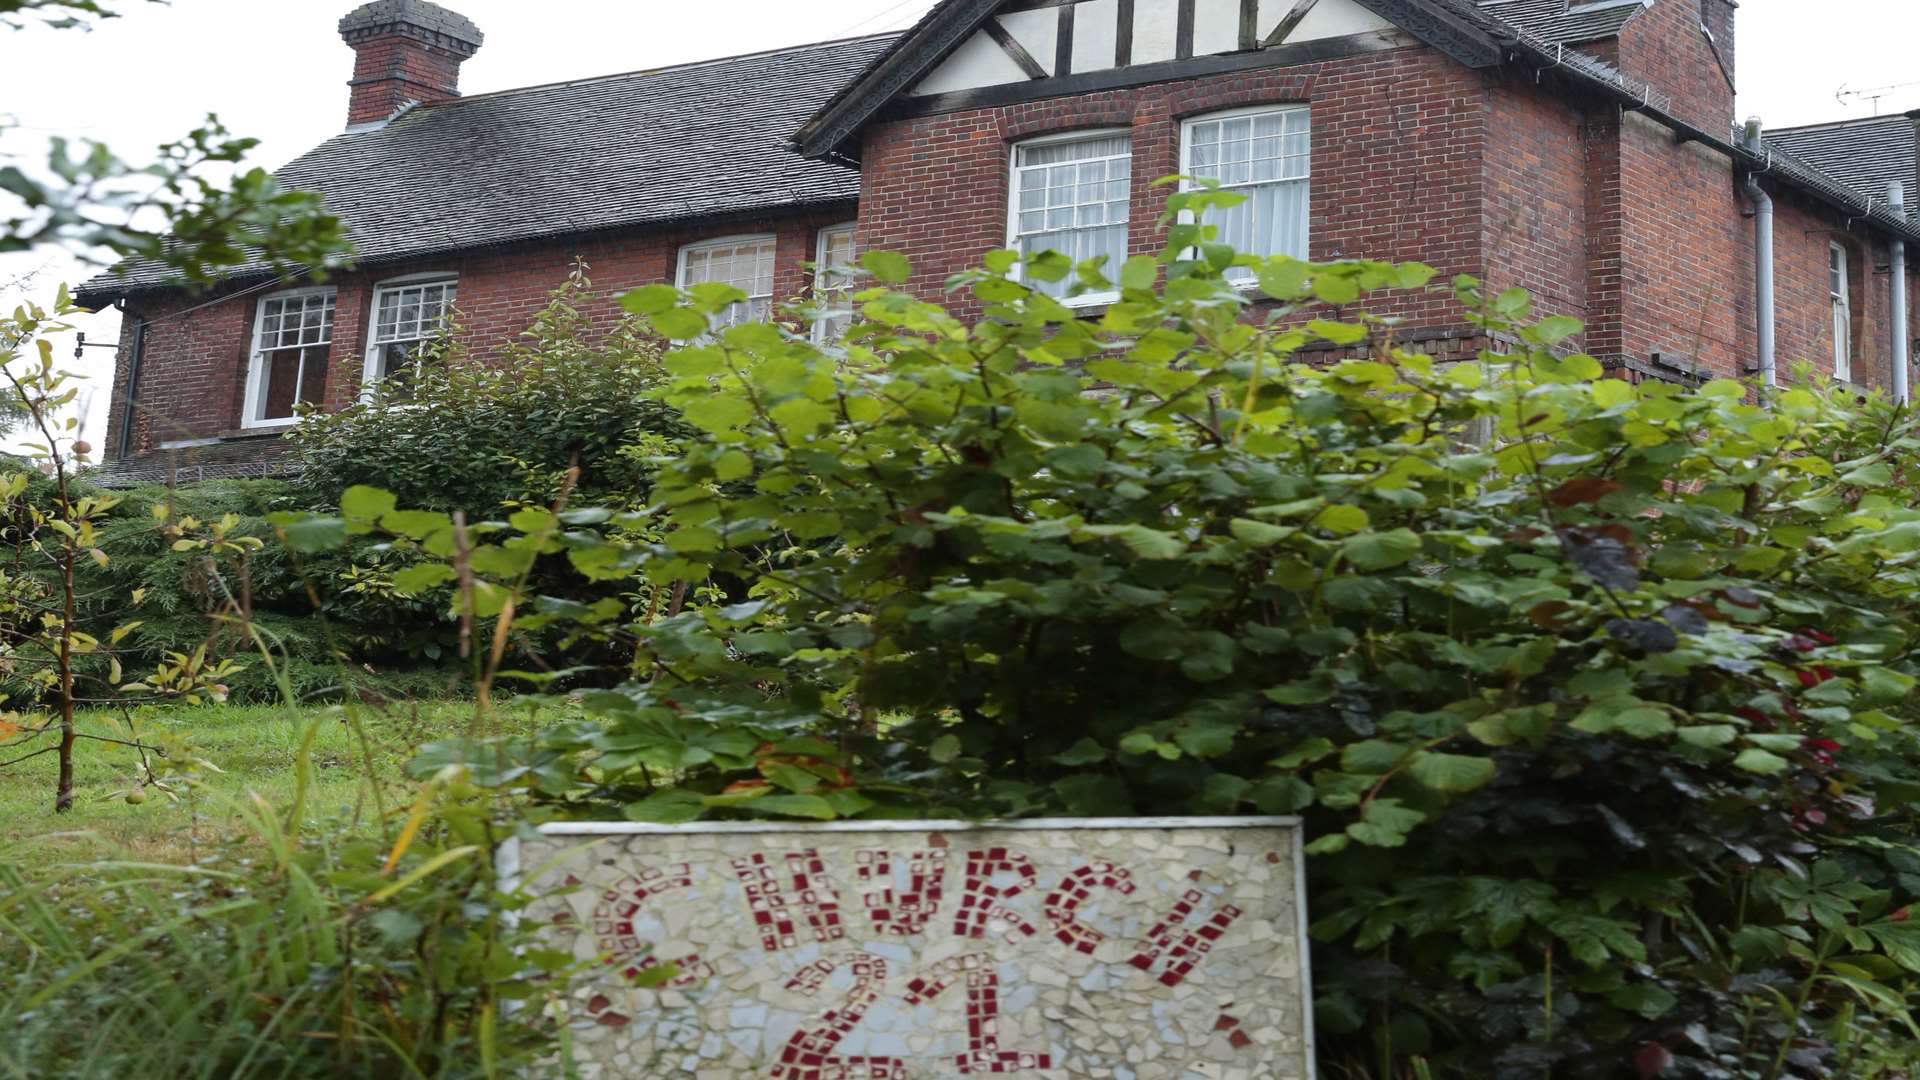 The care home has been told it requires improvement